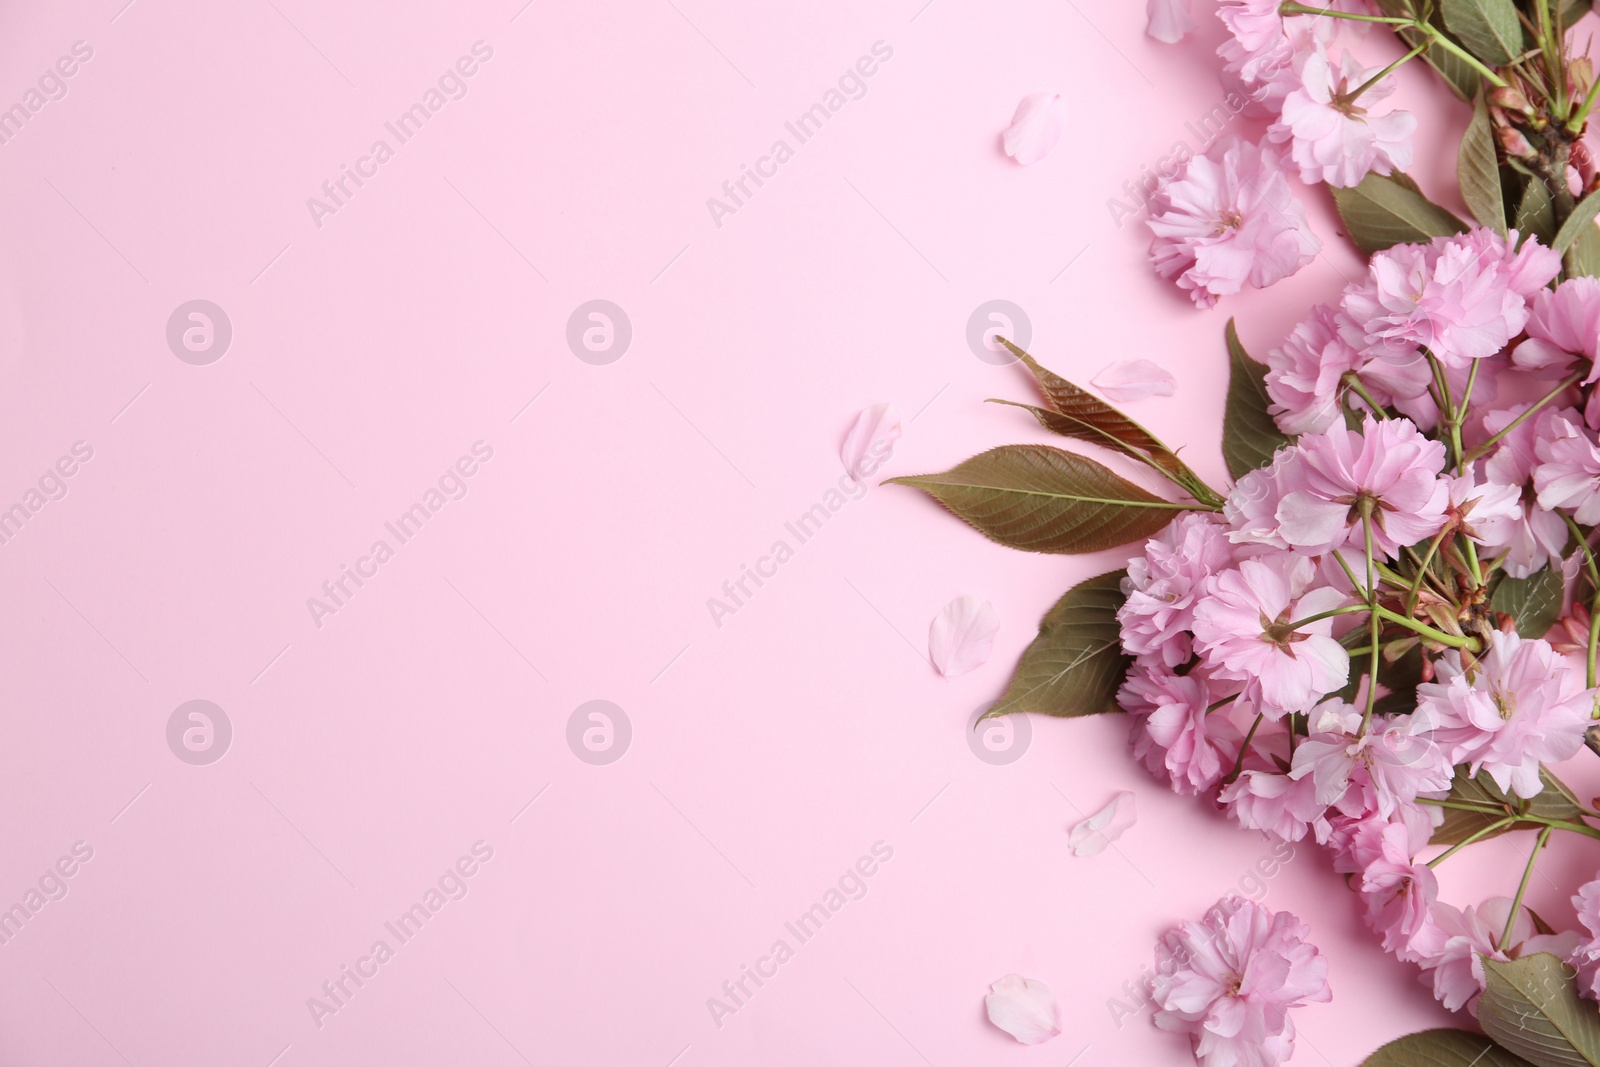 Photo of Sakura tree branch with beautiful blossom on pink background, space for text. Japanese cherry